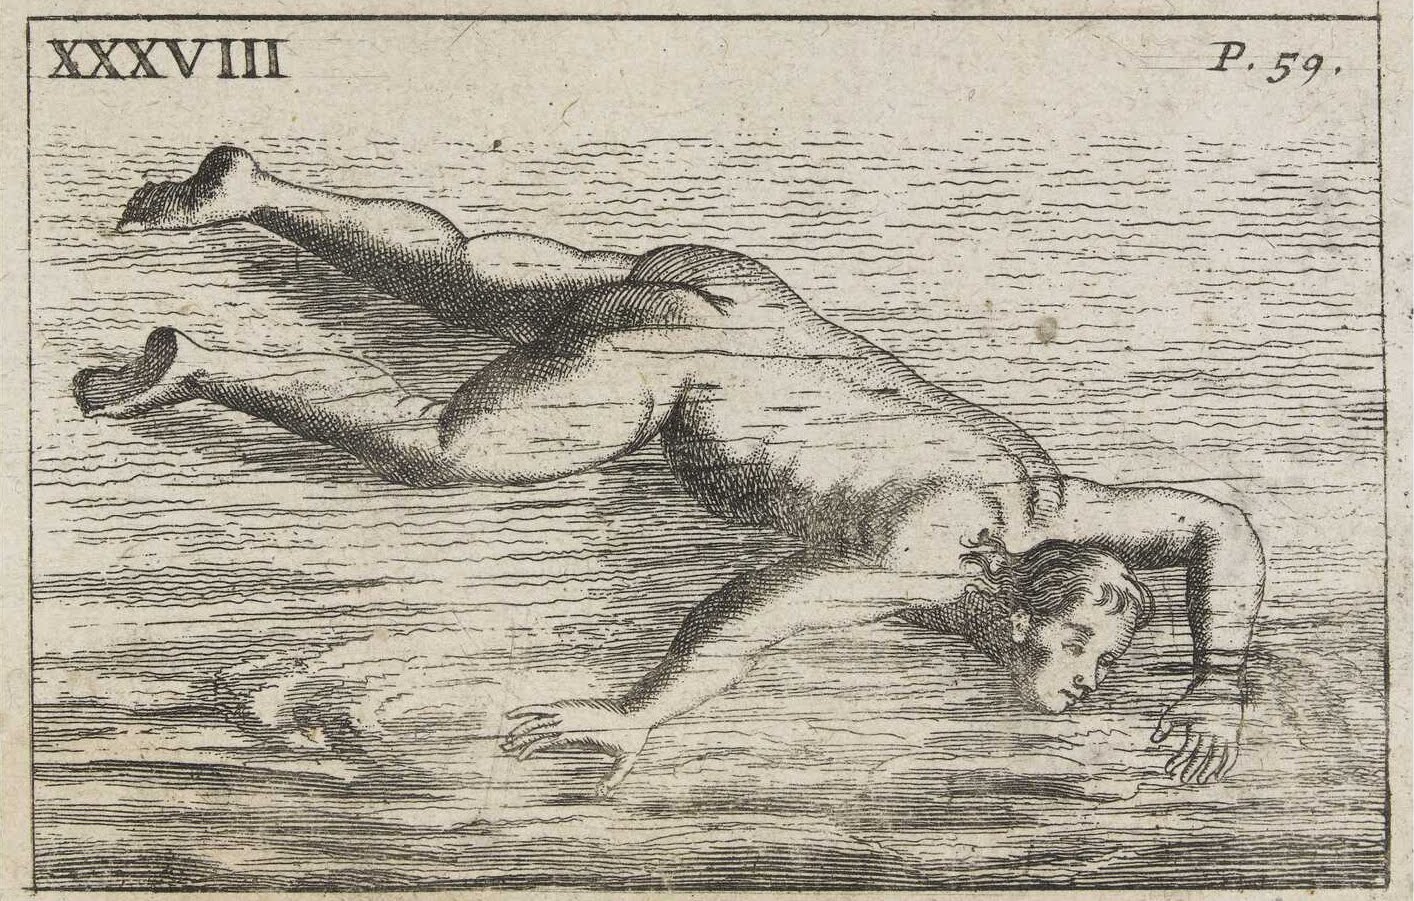 odd sketch of swimming style - 1700s